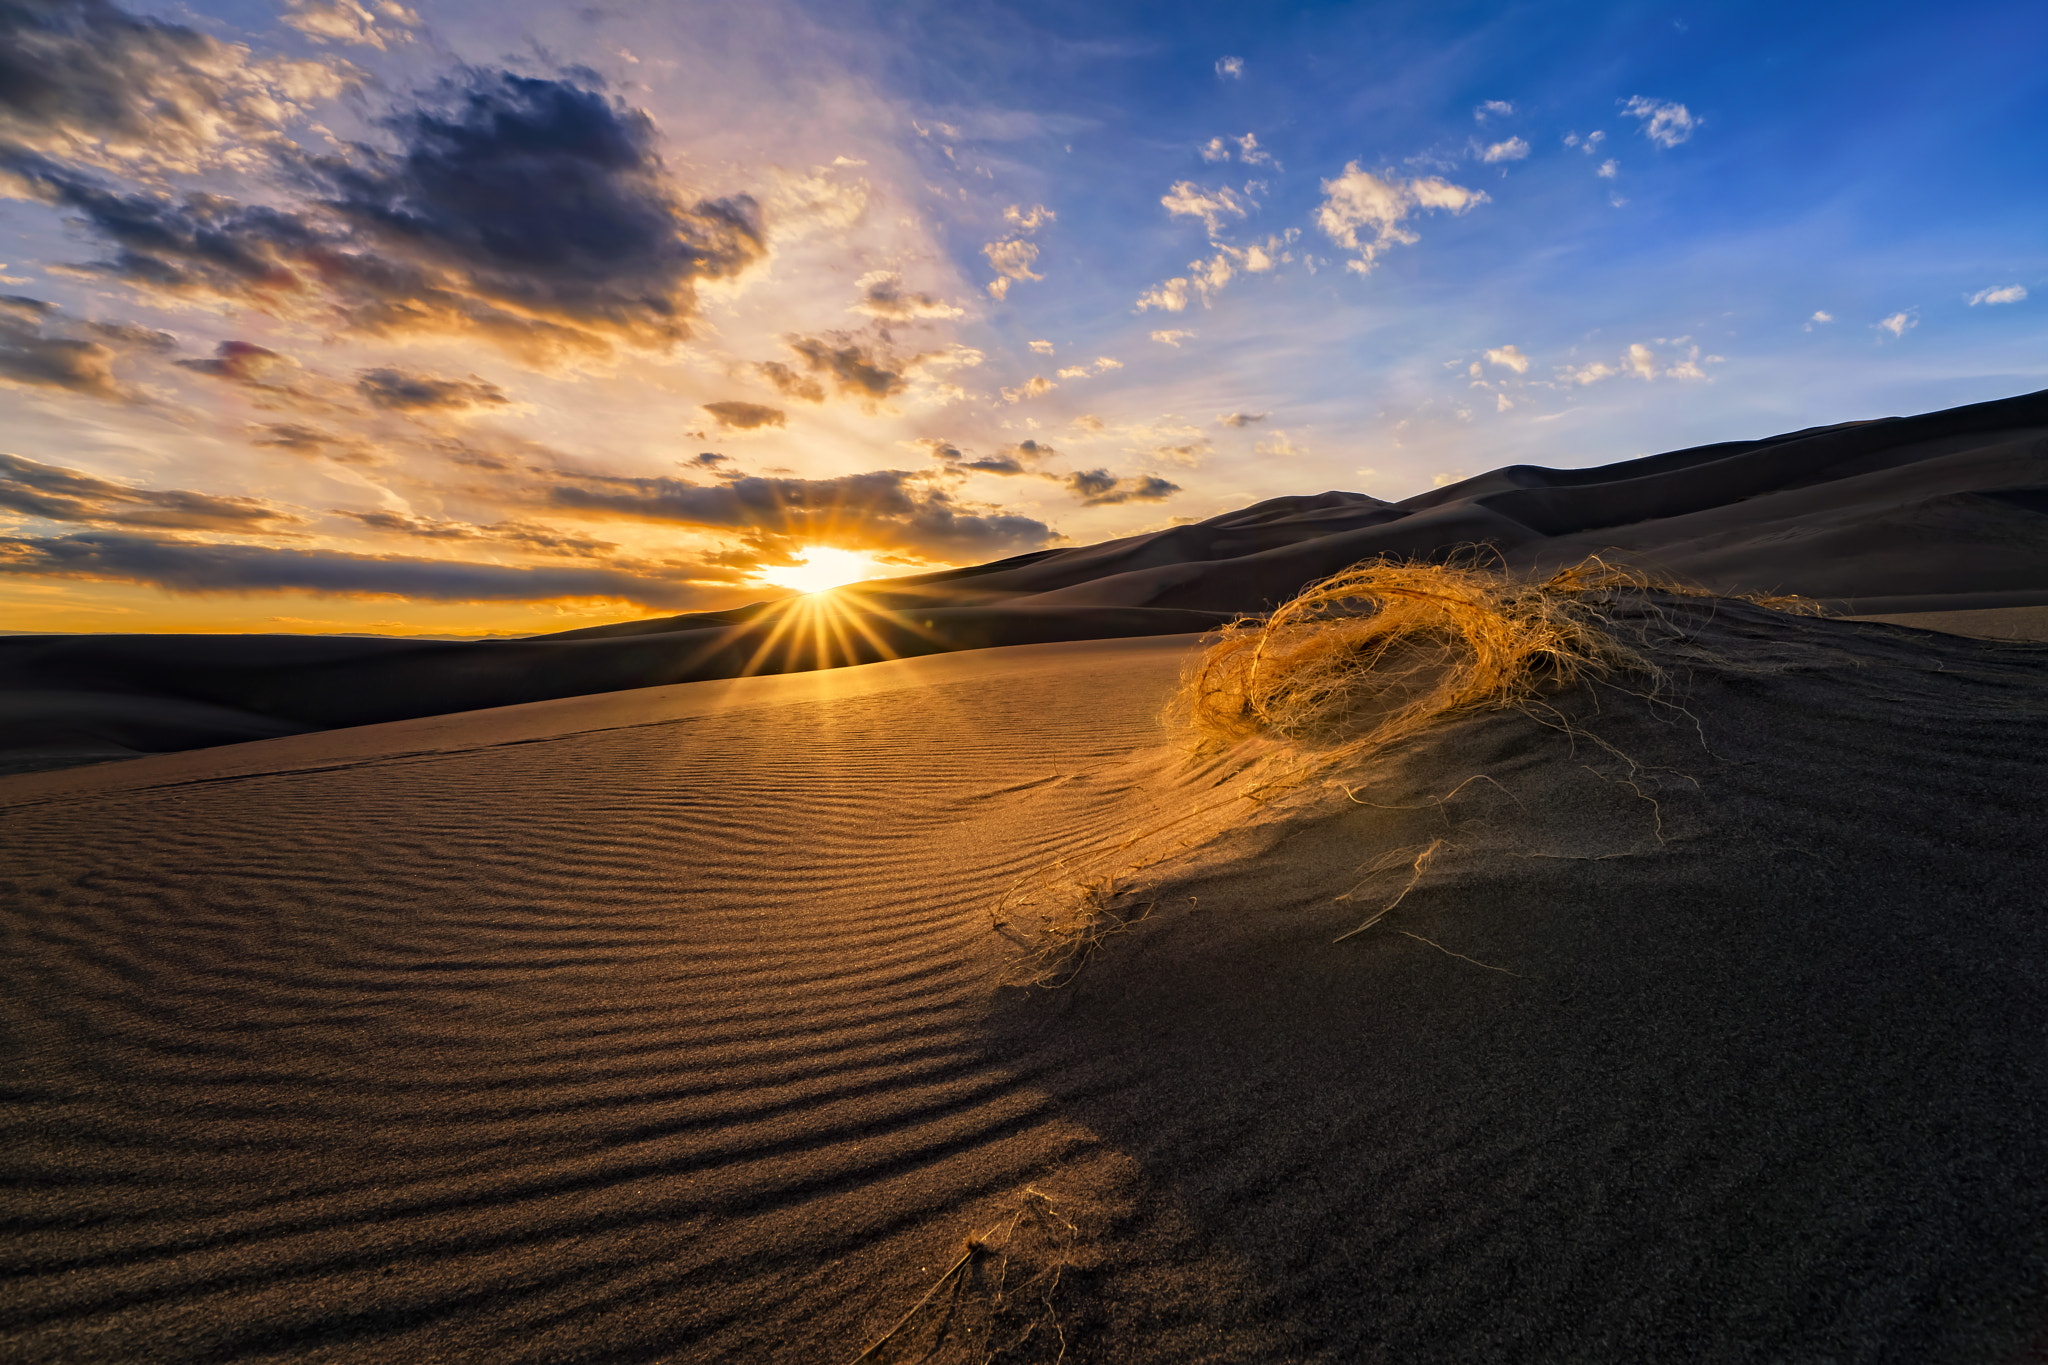 Sony a99 II sample photo. Sunset at the great sand dunes photography